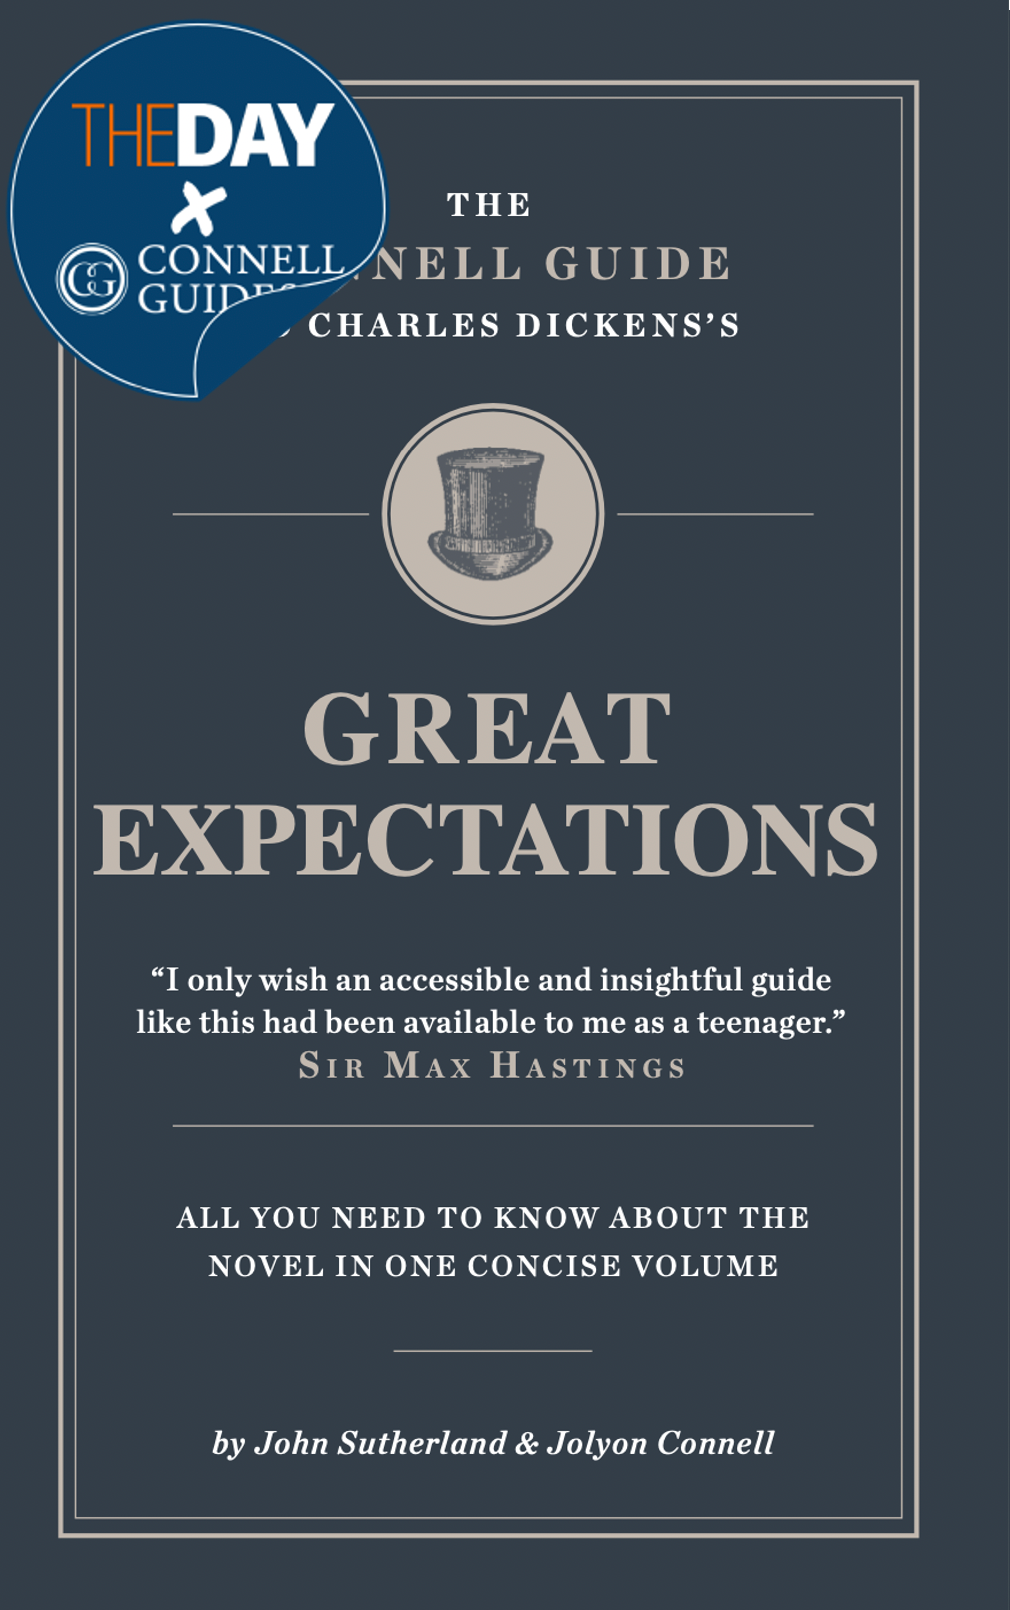 The Day x Connell Guides - The Connell Guide to Dickens' Great Expectations